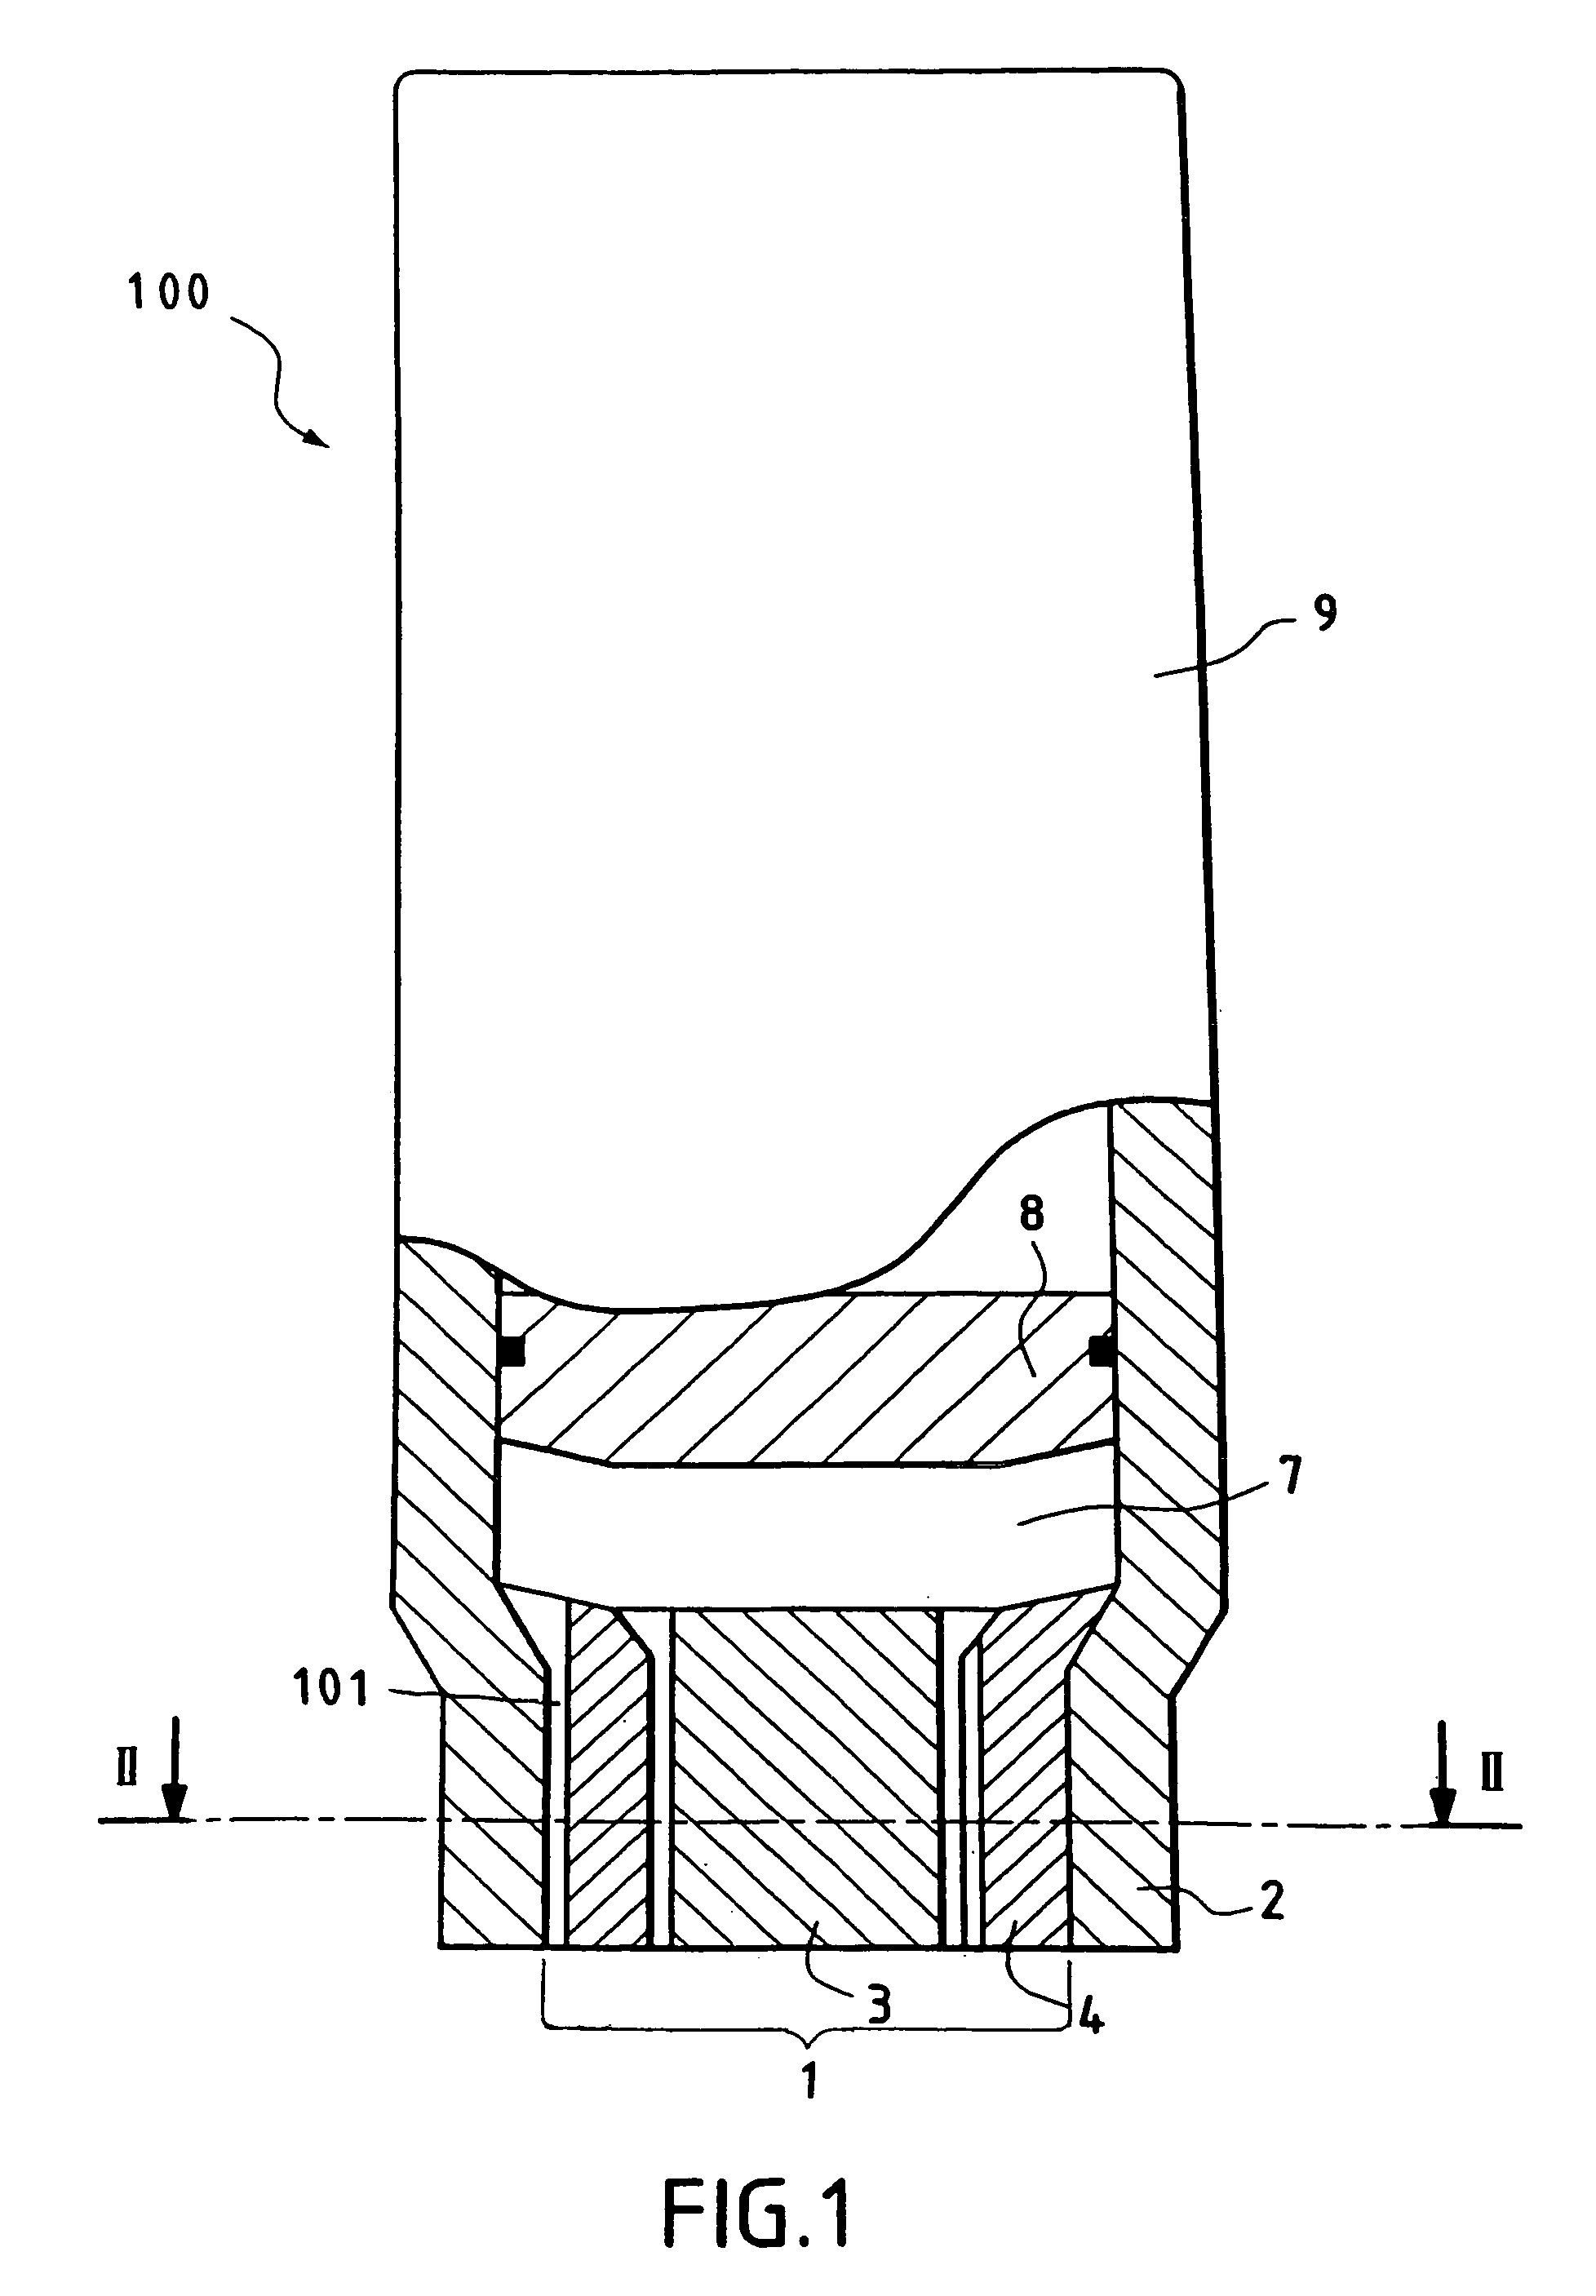 Needleless syringe comprising an injector with nested elements